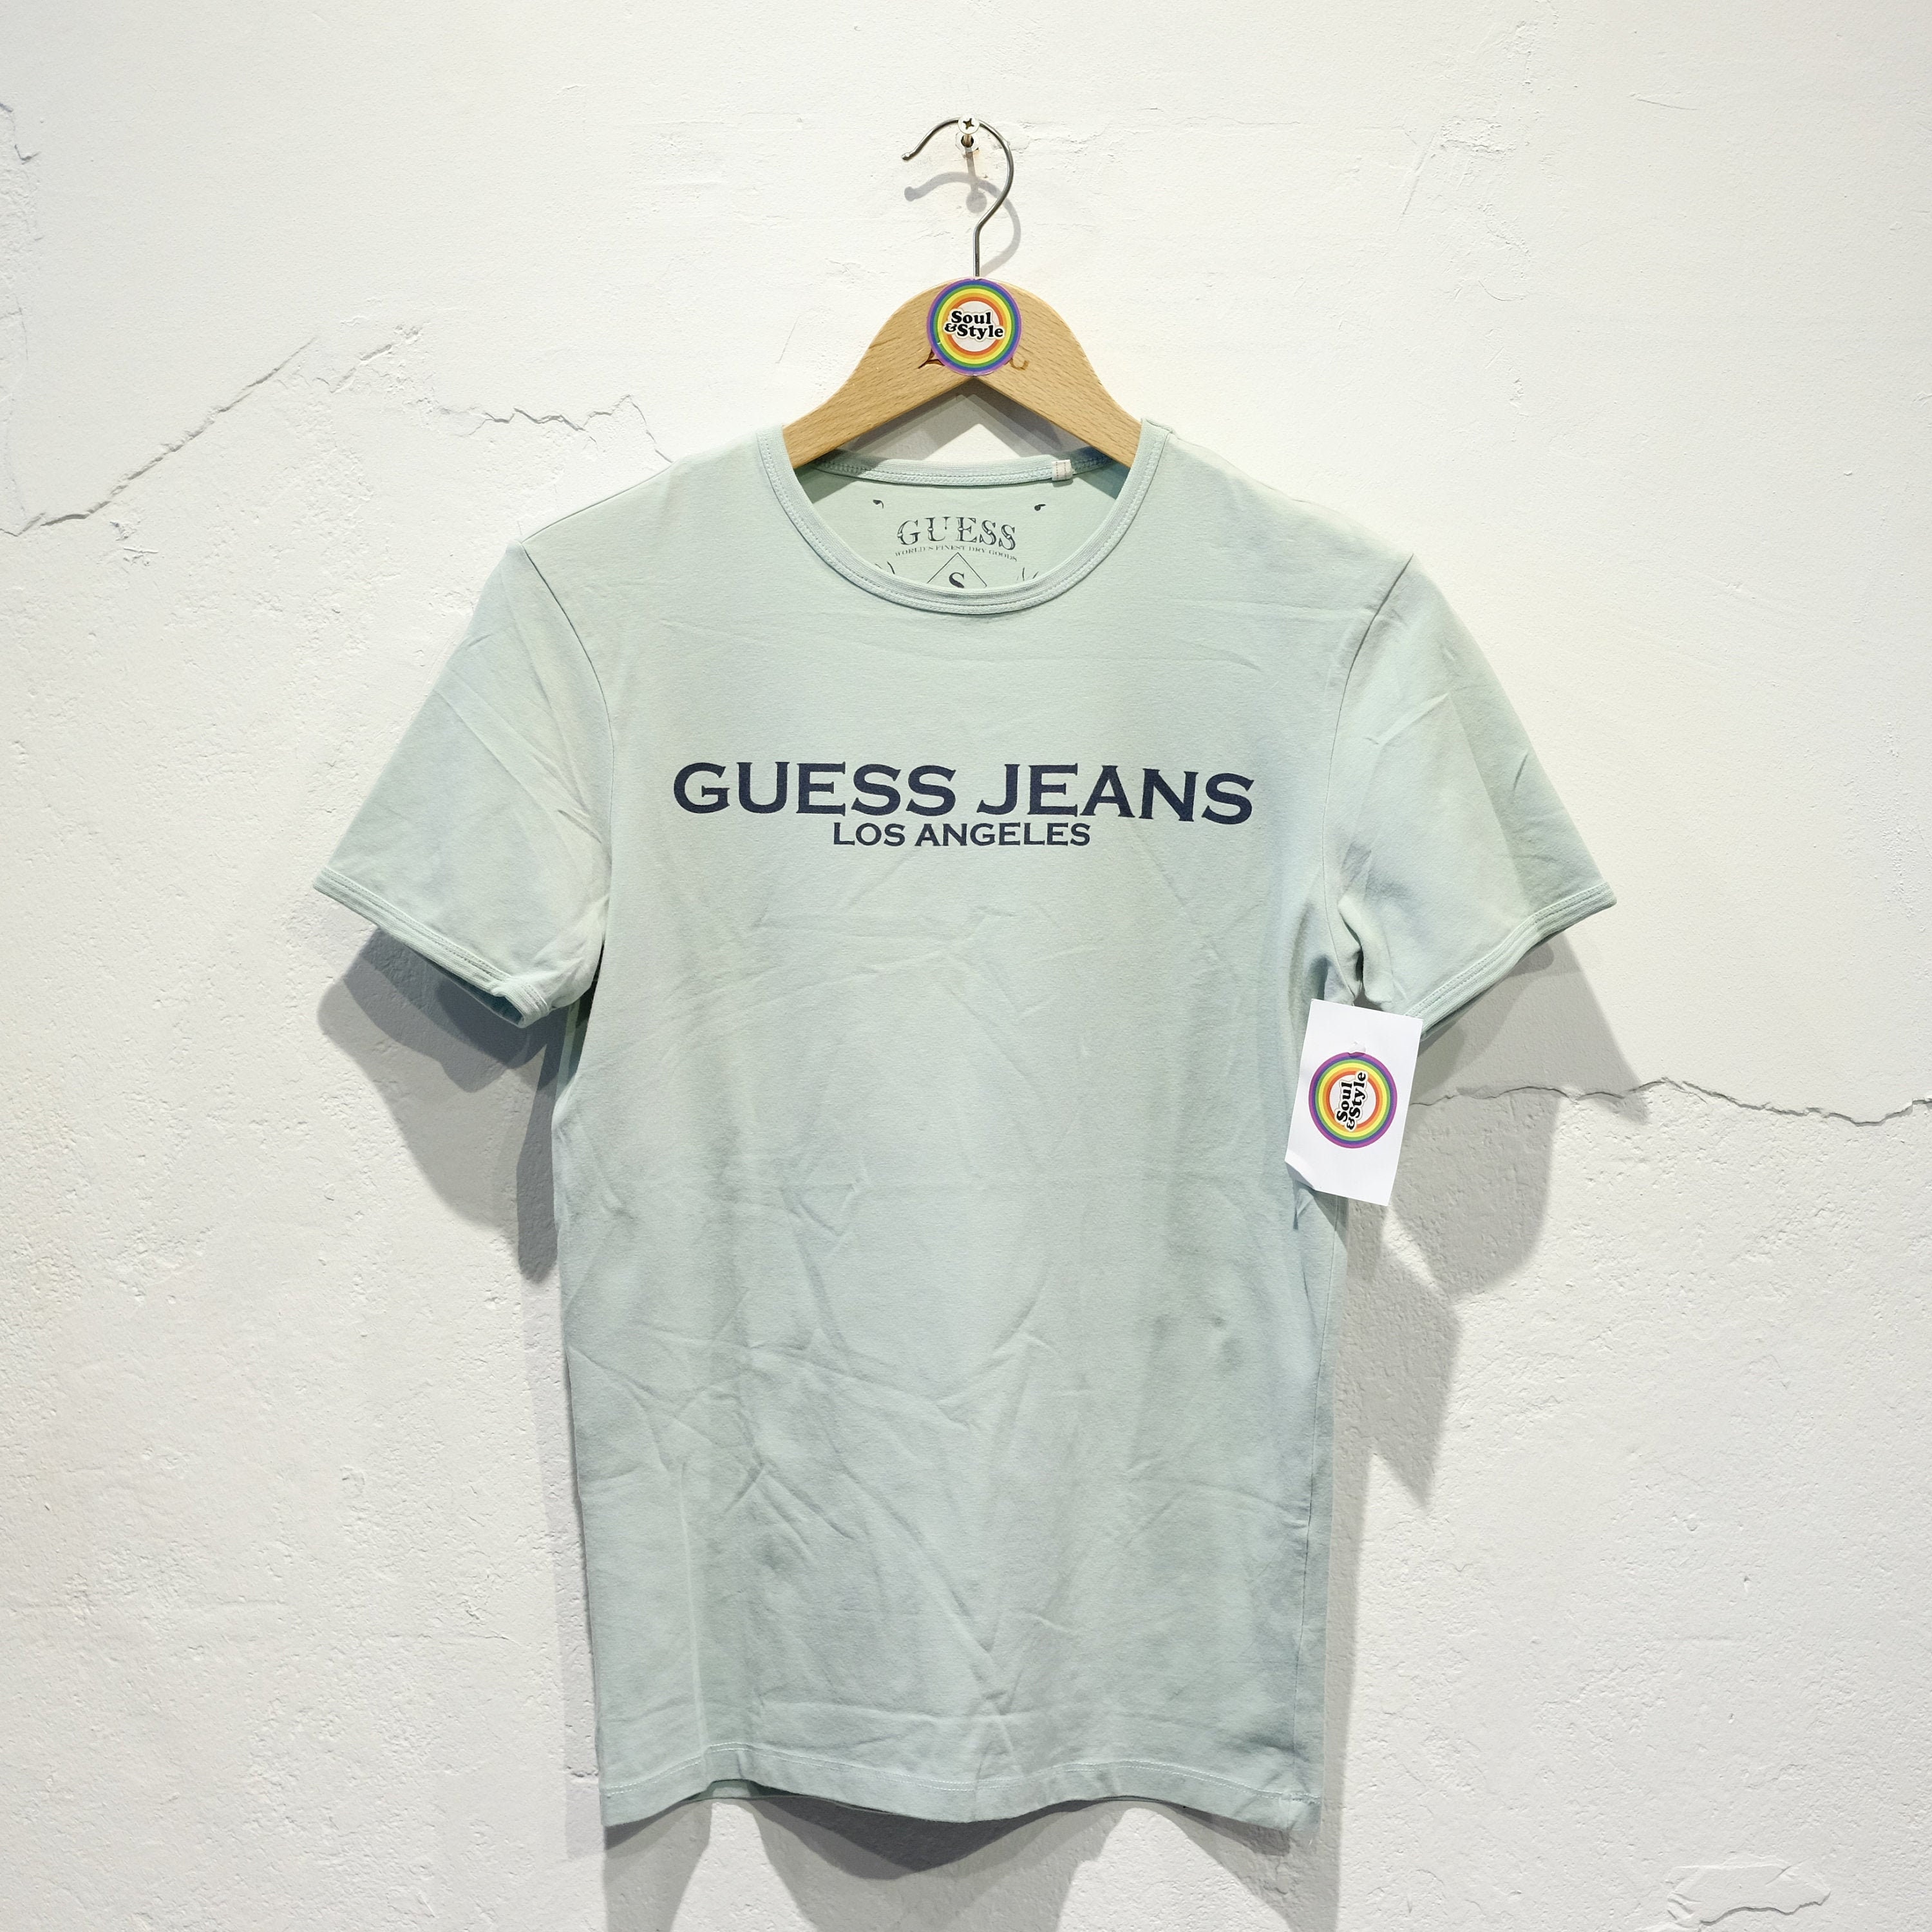 Guess Jeans Los Angeles Etsy